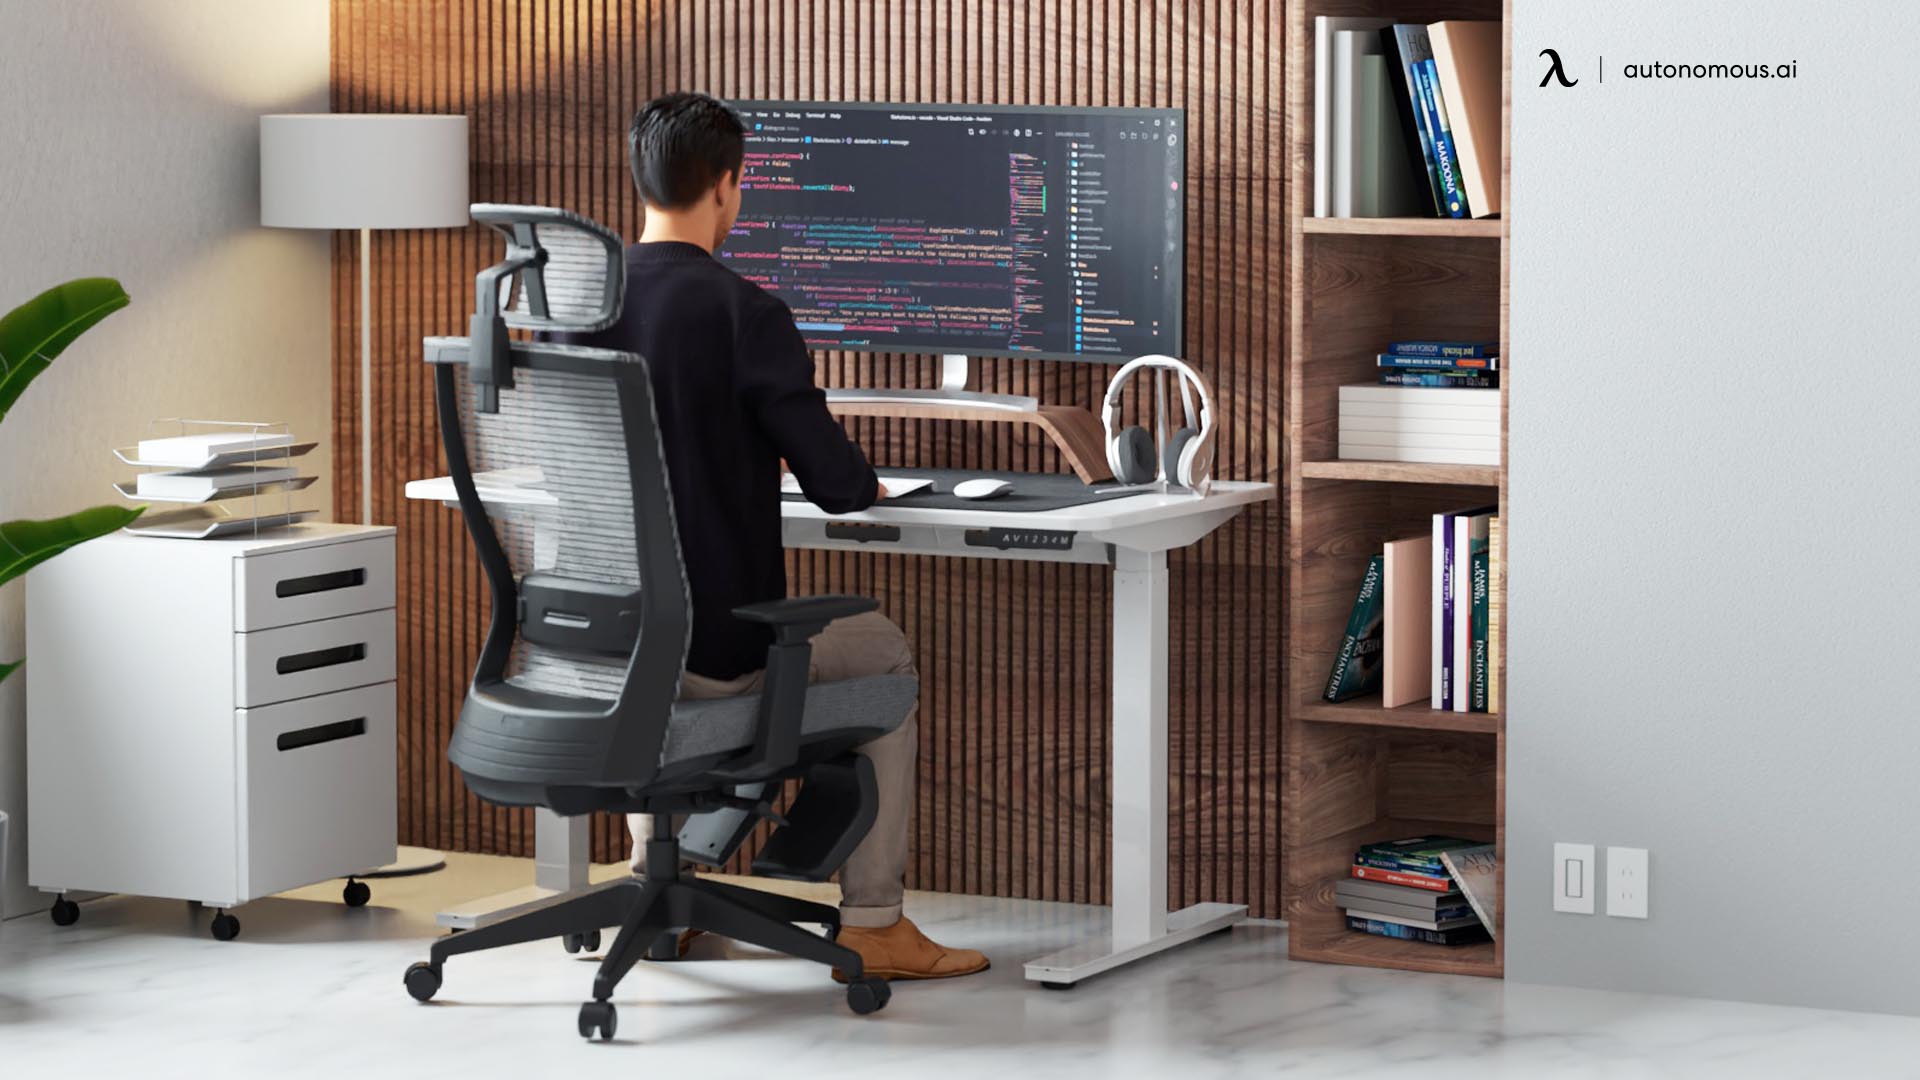 https://cdn.autonomous.ai/static/upload/images/new_post/5-best-chair-posture-correctors-for-office-in-2021-2126.jpg